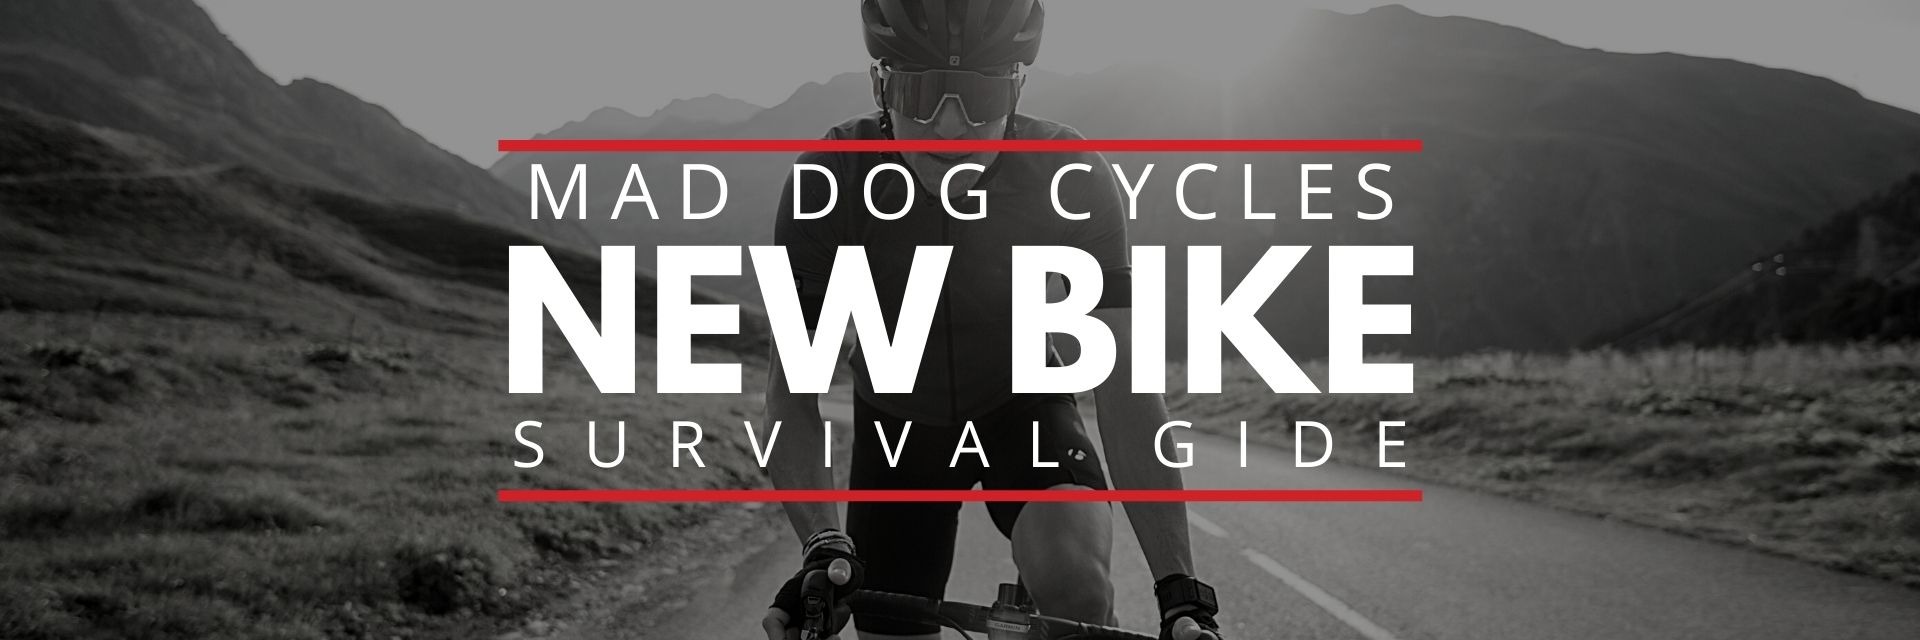 Mad Dog Cycles New Bike Survival Guide